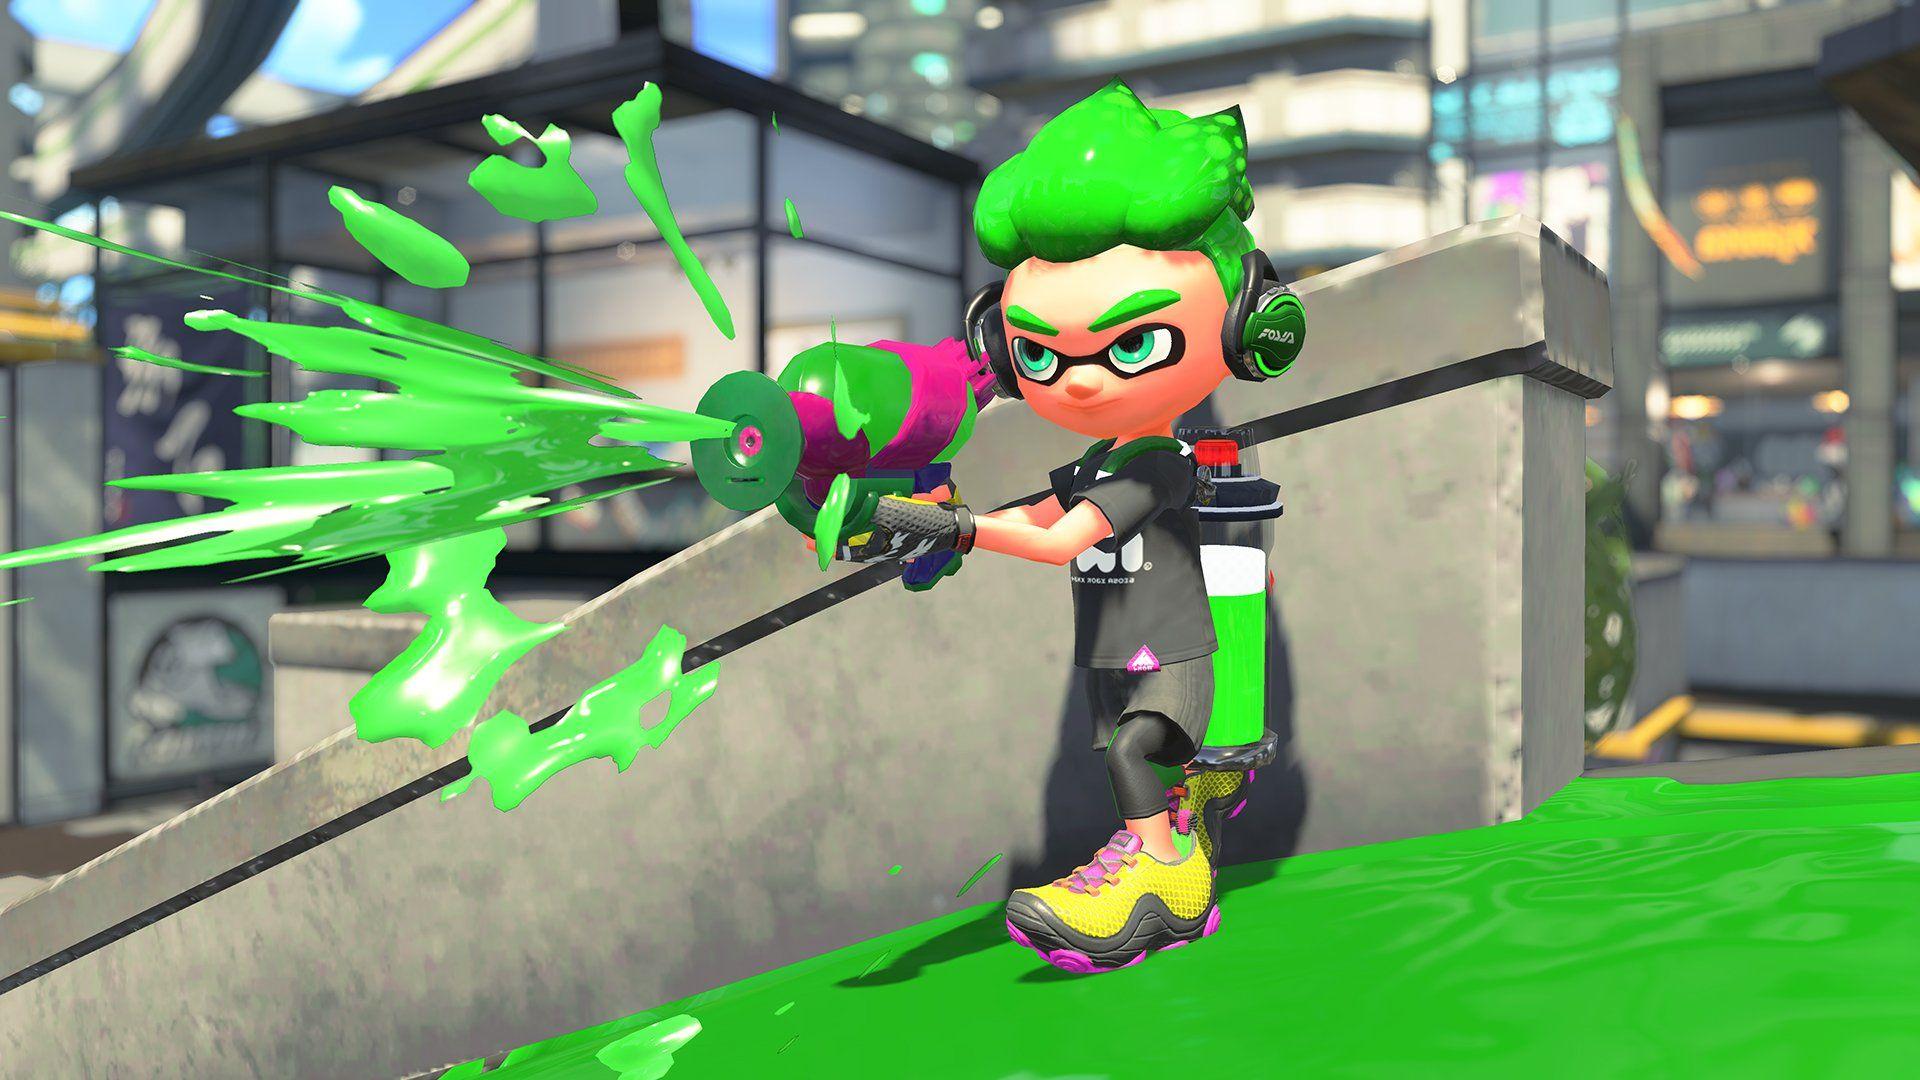 Splatoon 2: all the details, pics, GIFs (and more.) from